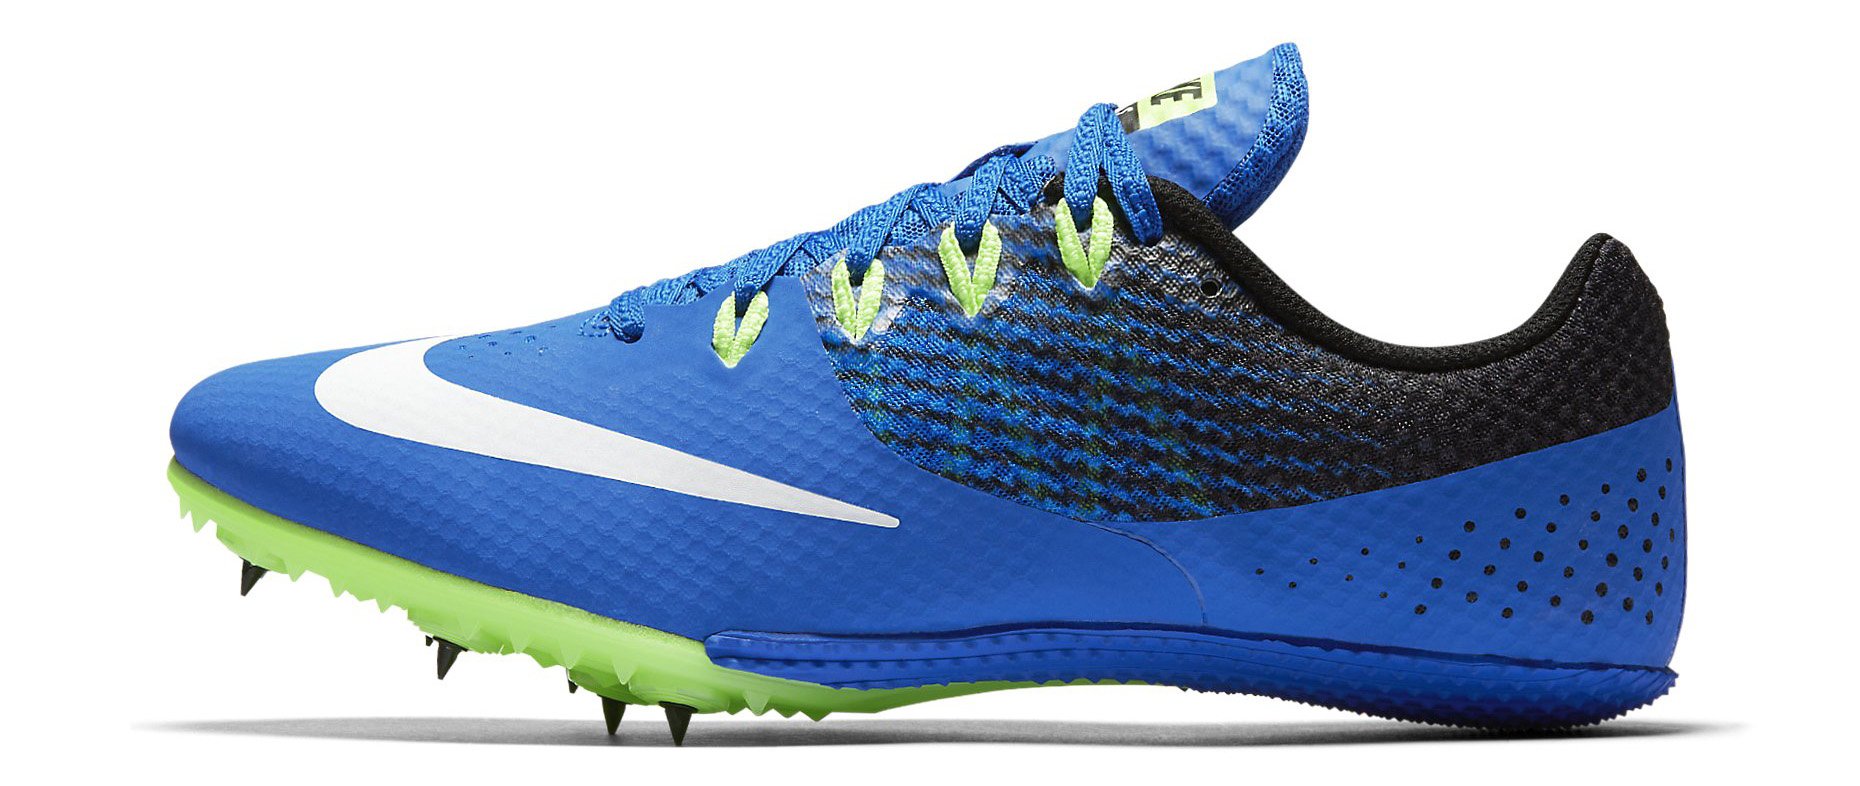 nike zoom rival s8 spikes